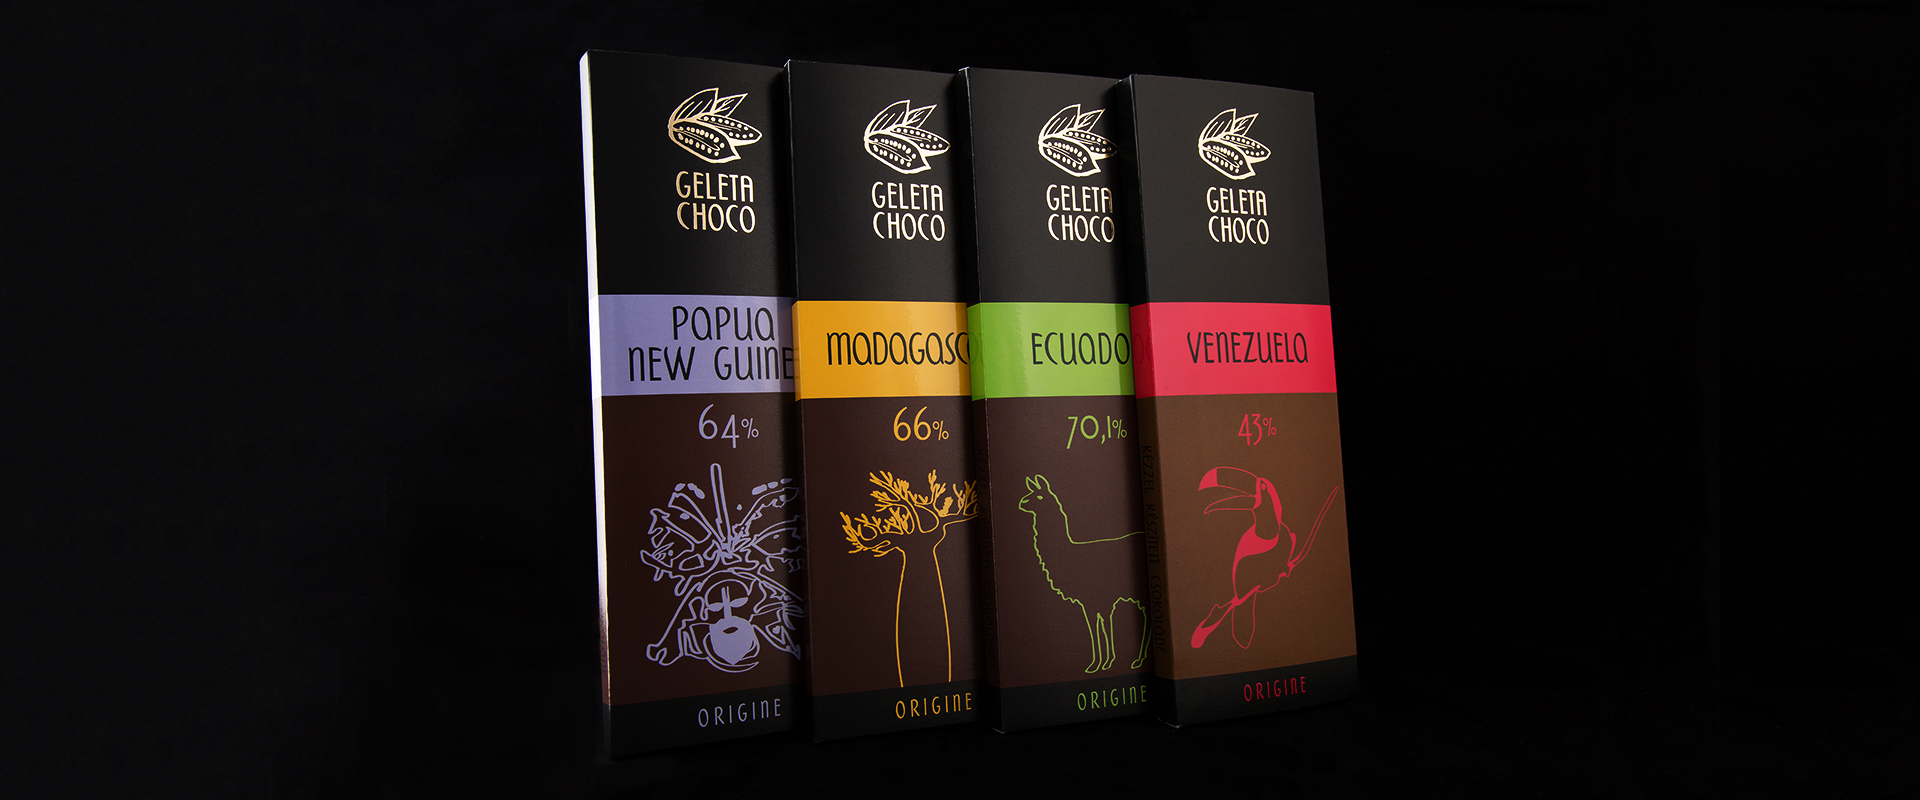 Nice packaging design for the Geleta product family...